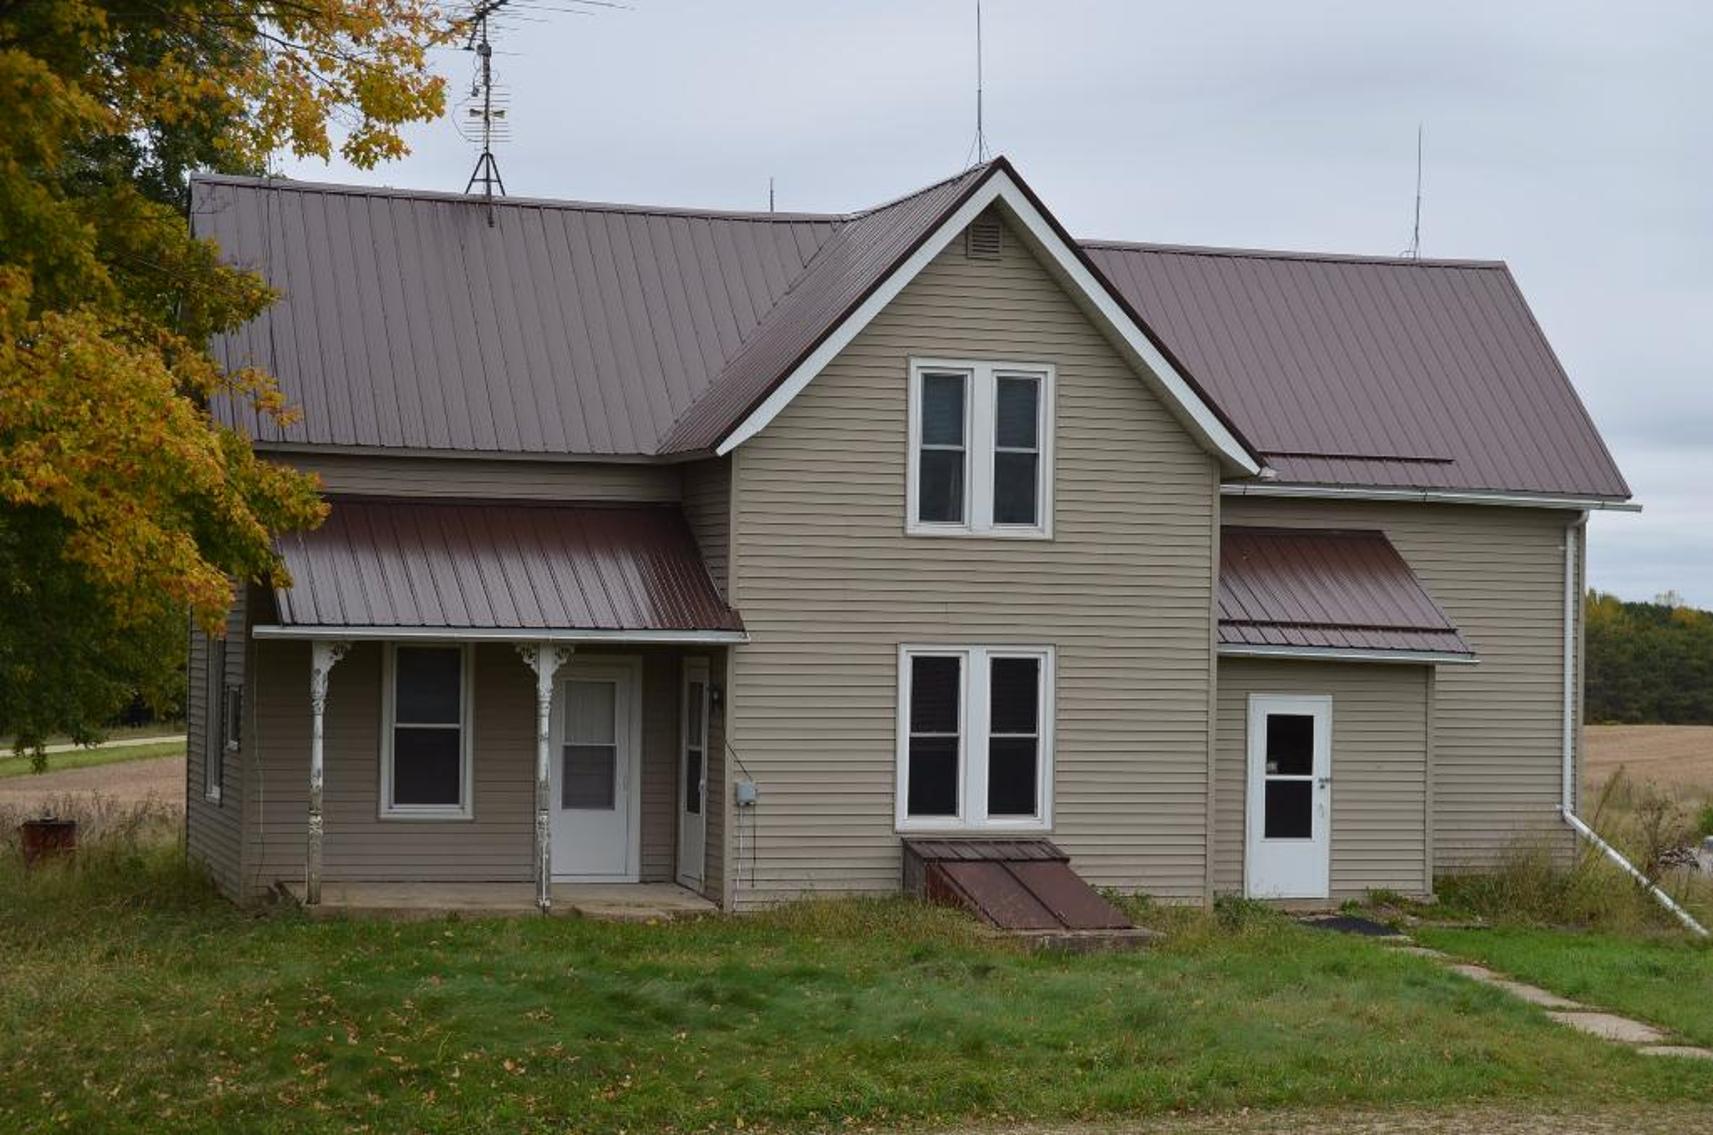 House on 2 Acres - Stockholm, WI